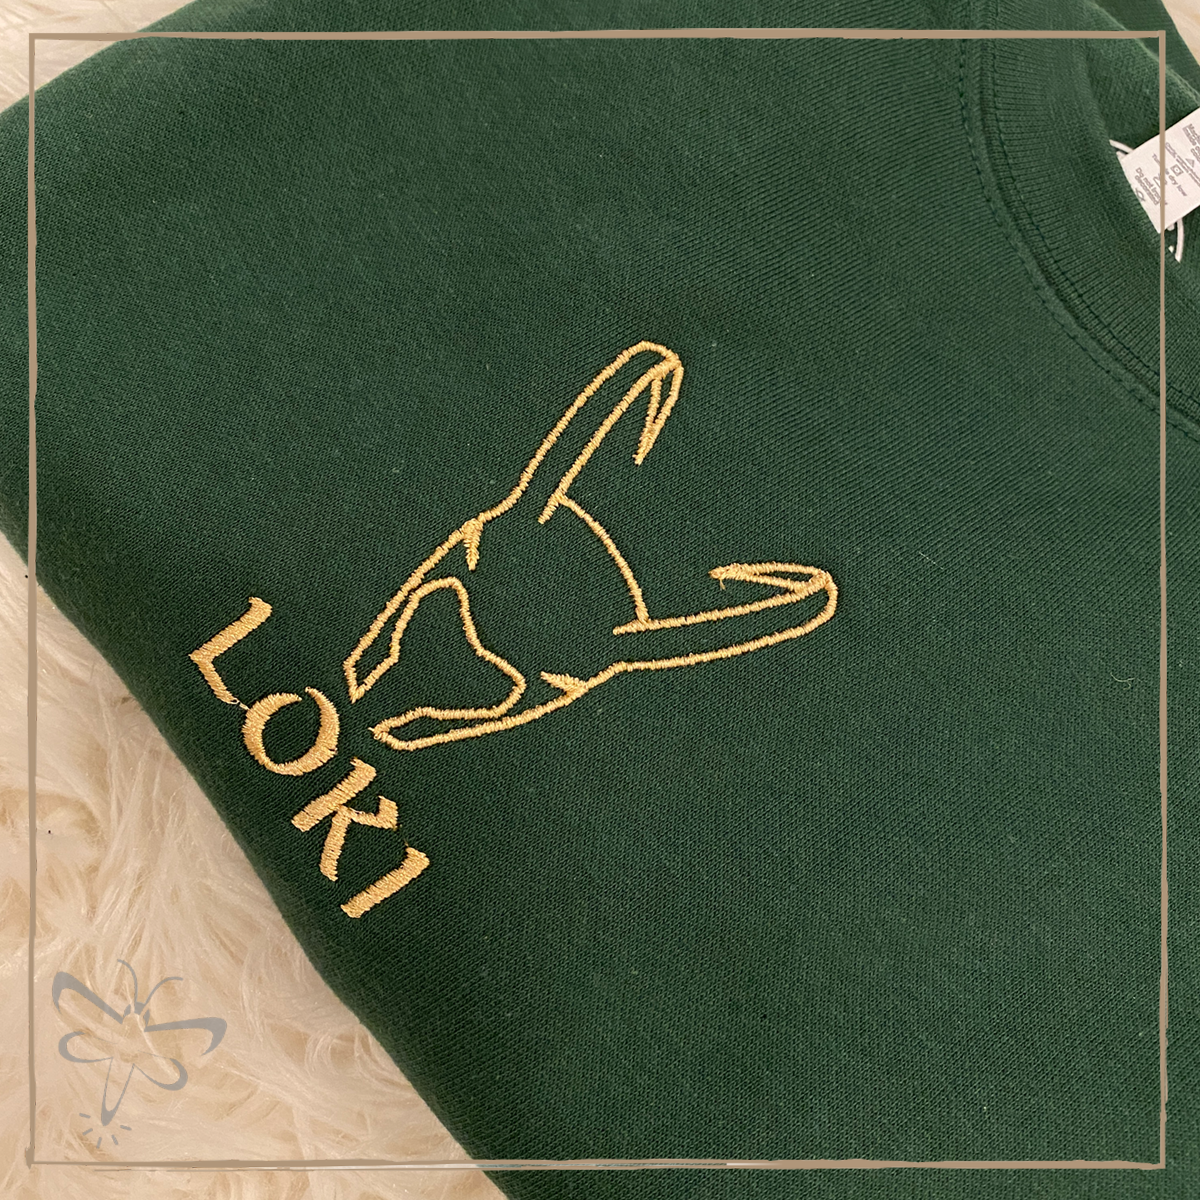 Loki Embroidered Crewneck Xs / Forest Green Sweater